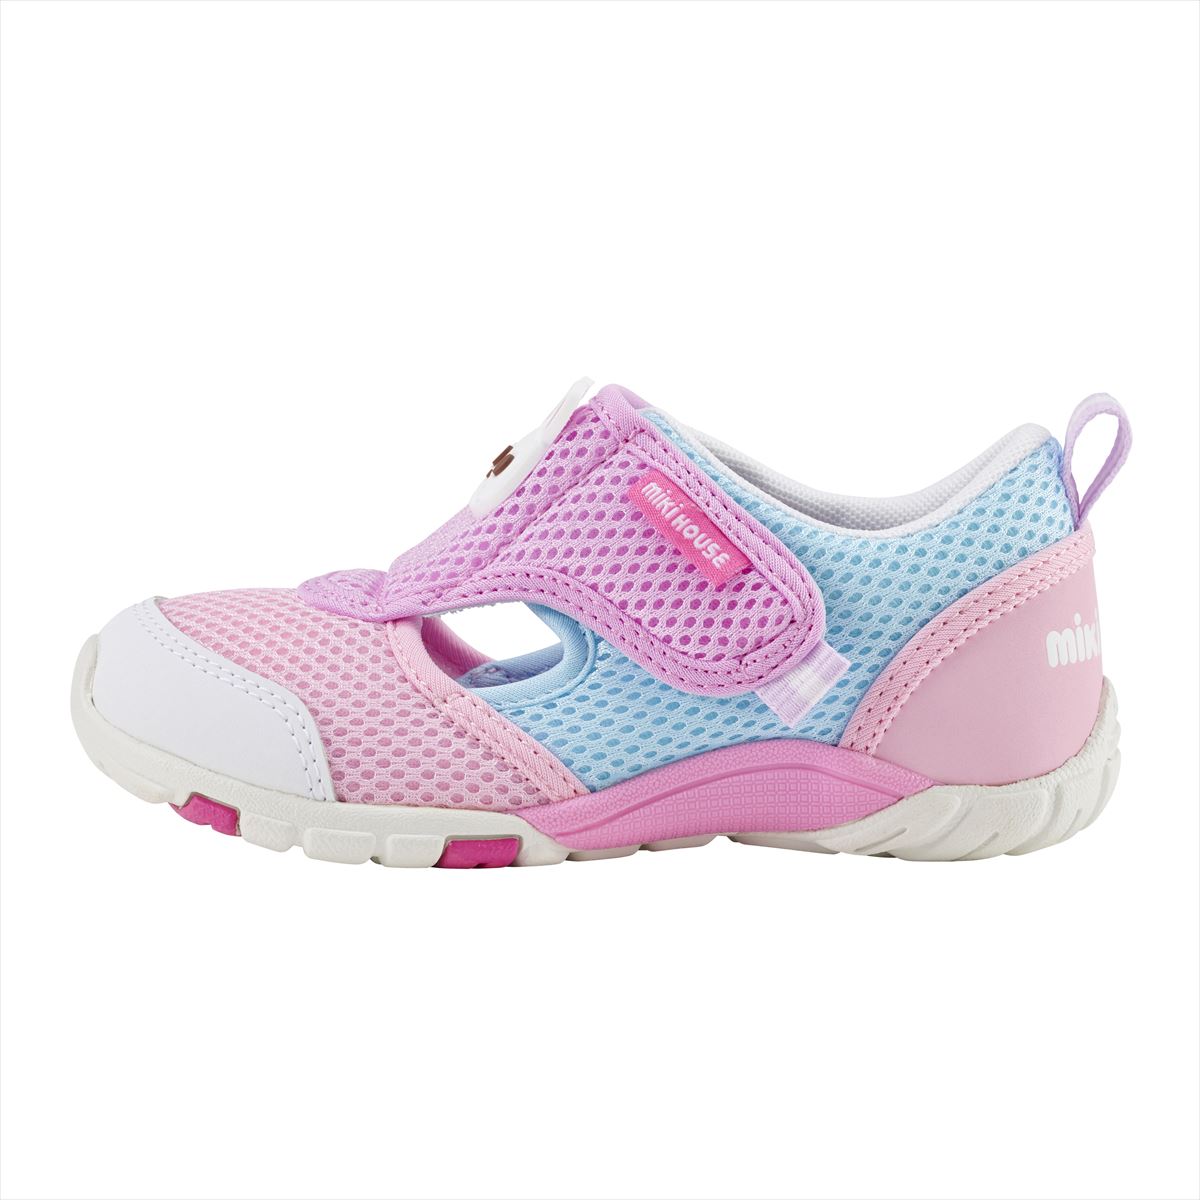 Double Russell Mesh Sneakers for Kids - Lavender Dreams – MIKI 